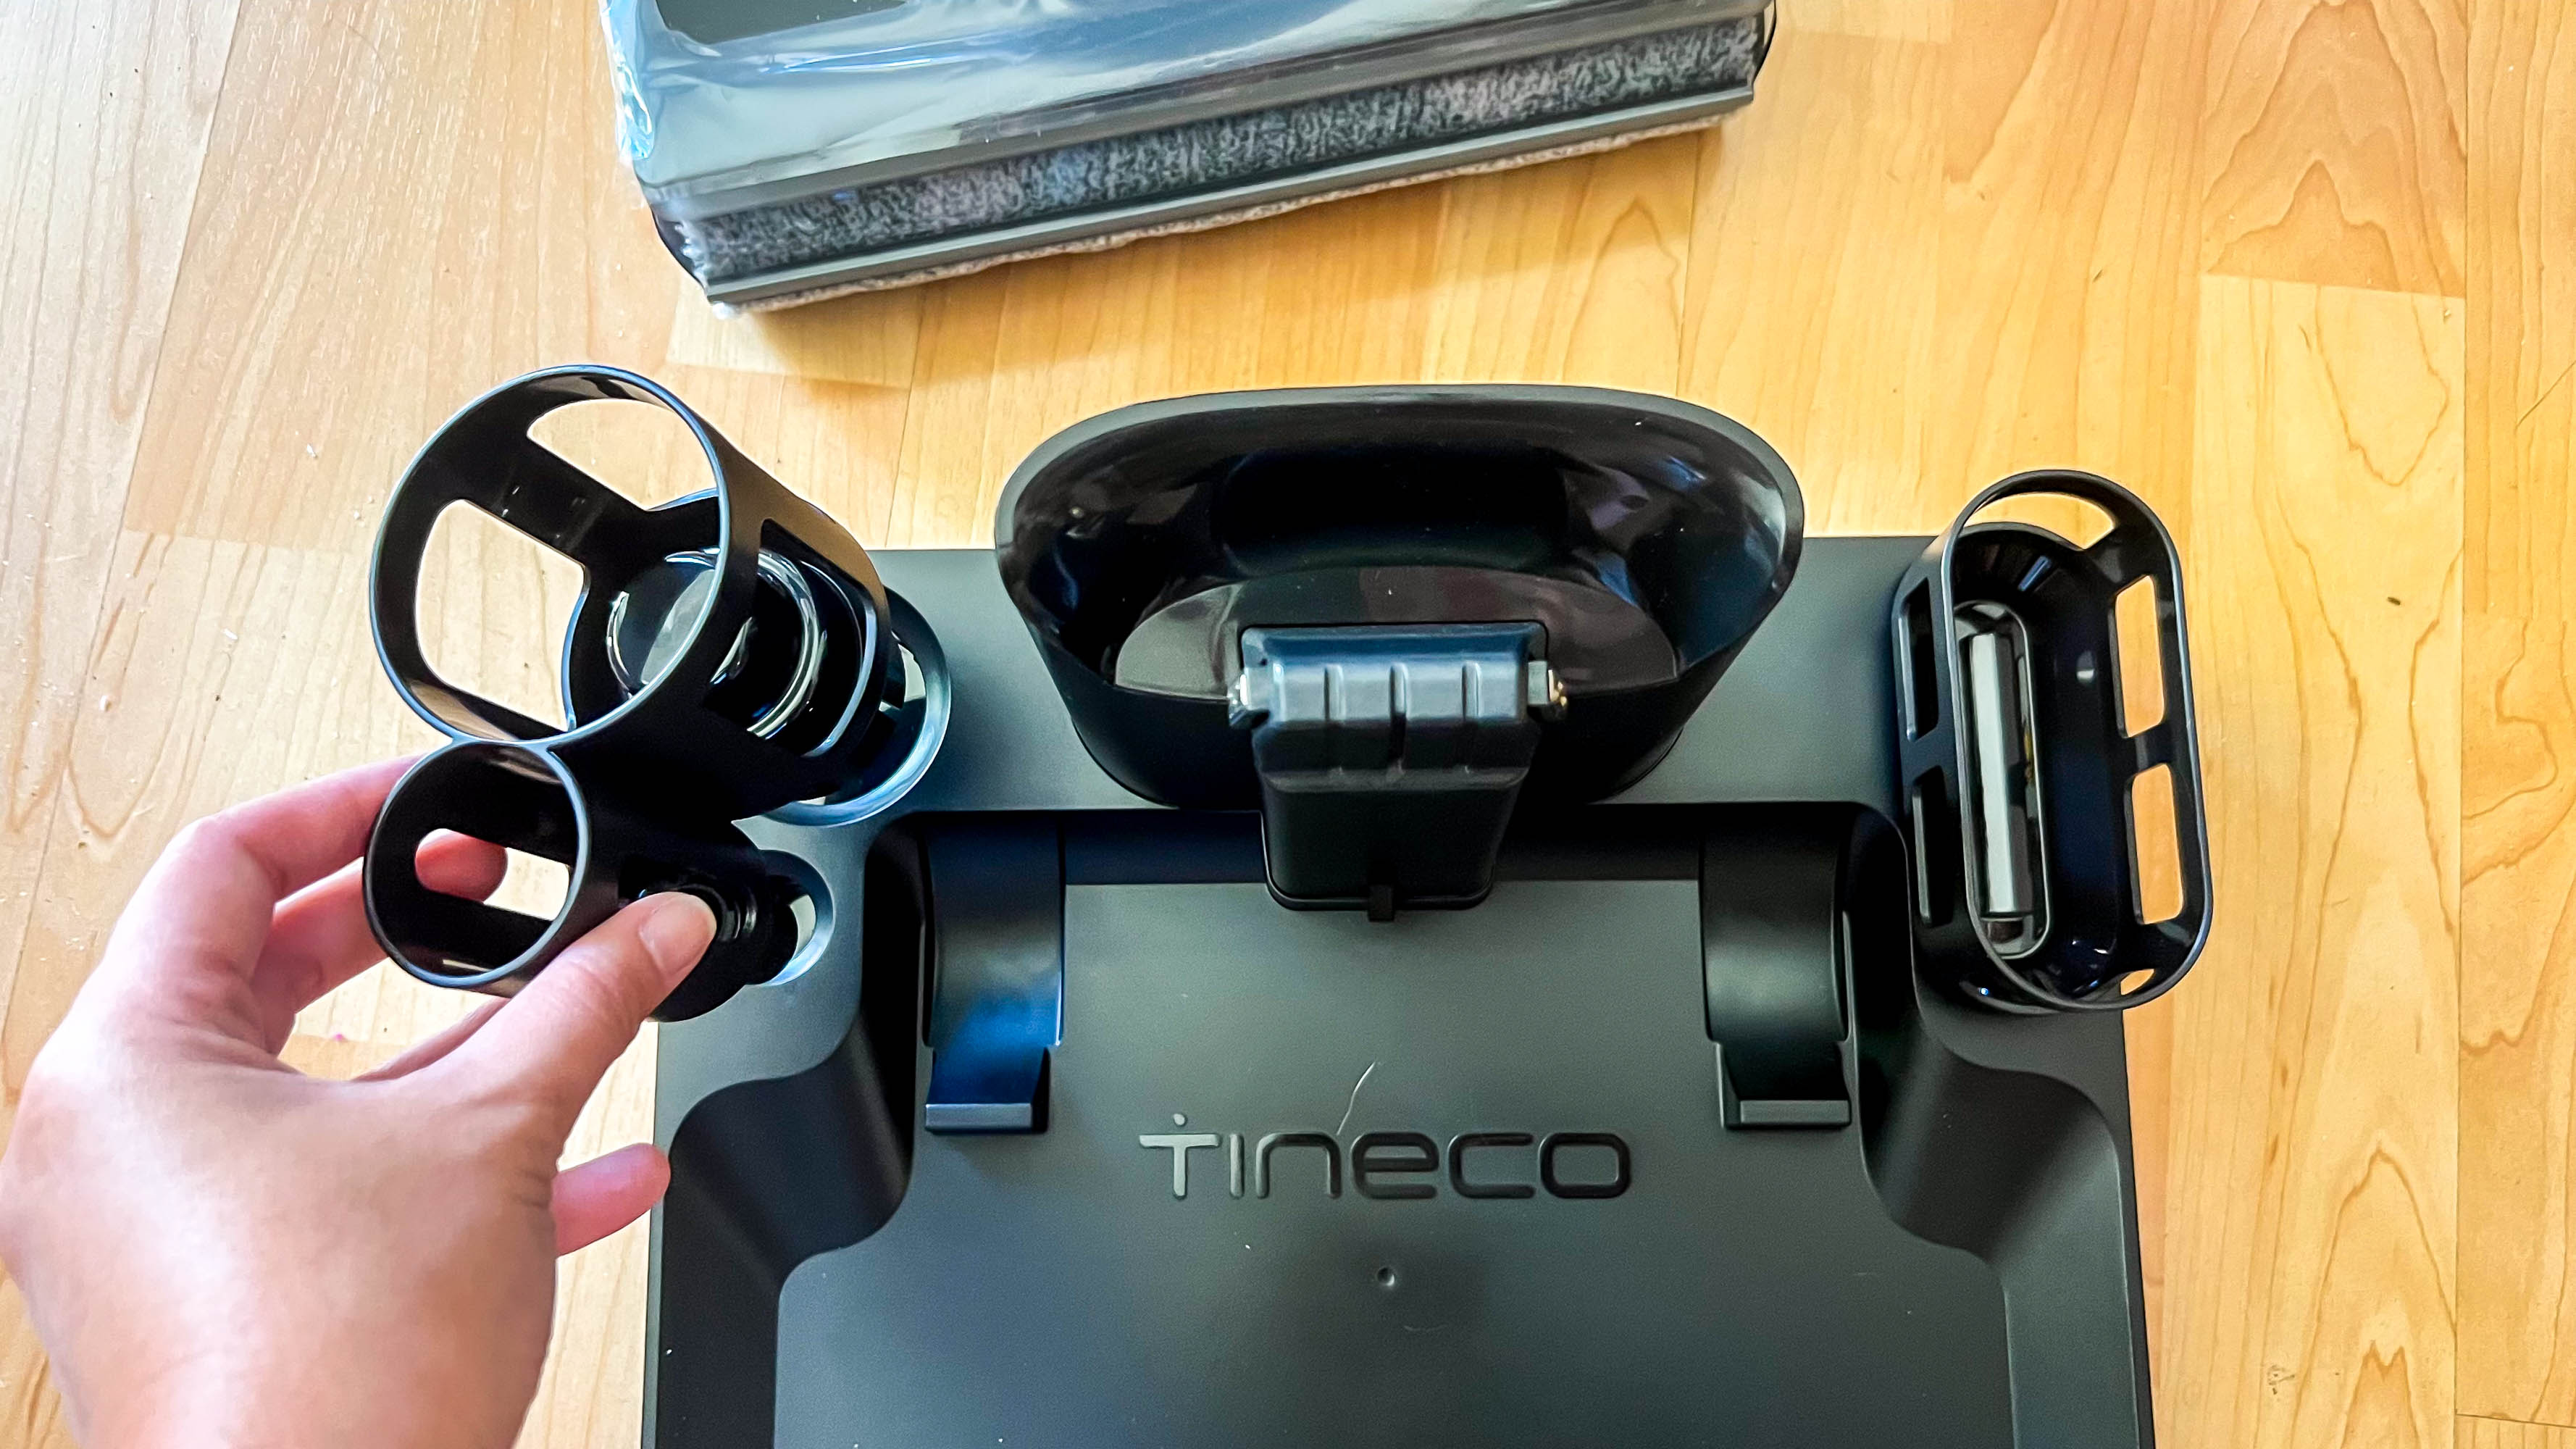 Tineco Floor One S7 Pro in use by author